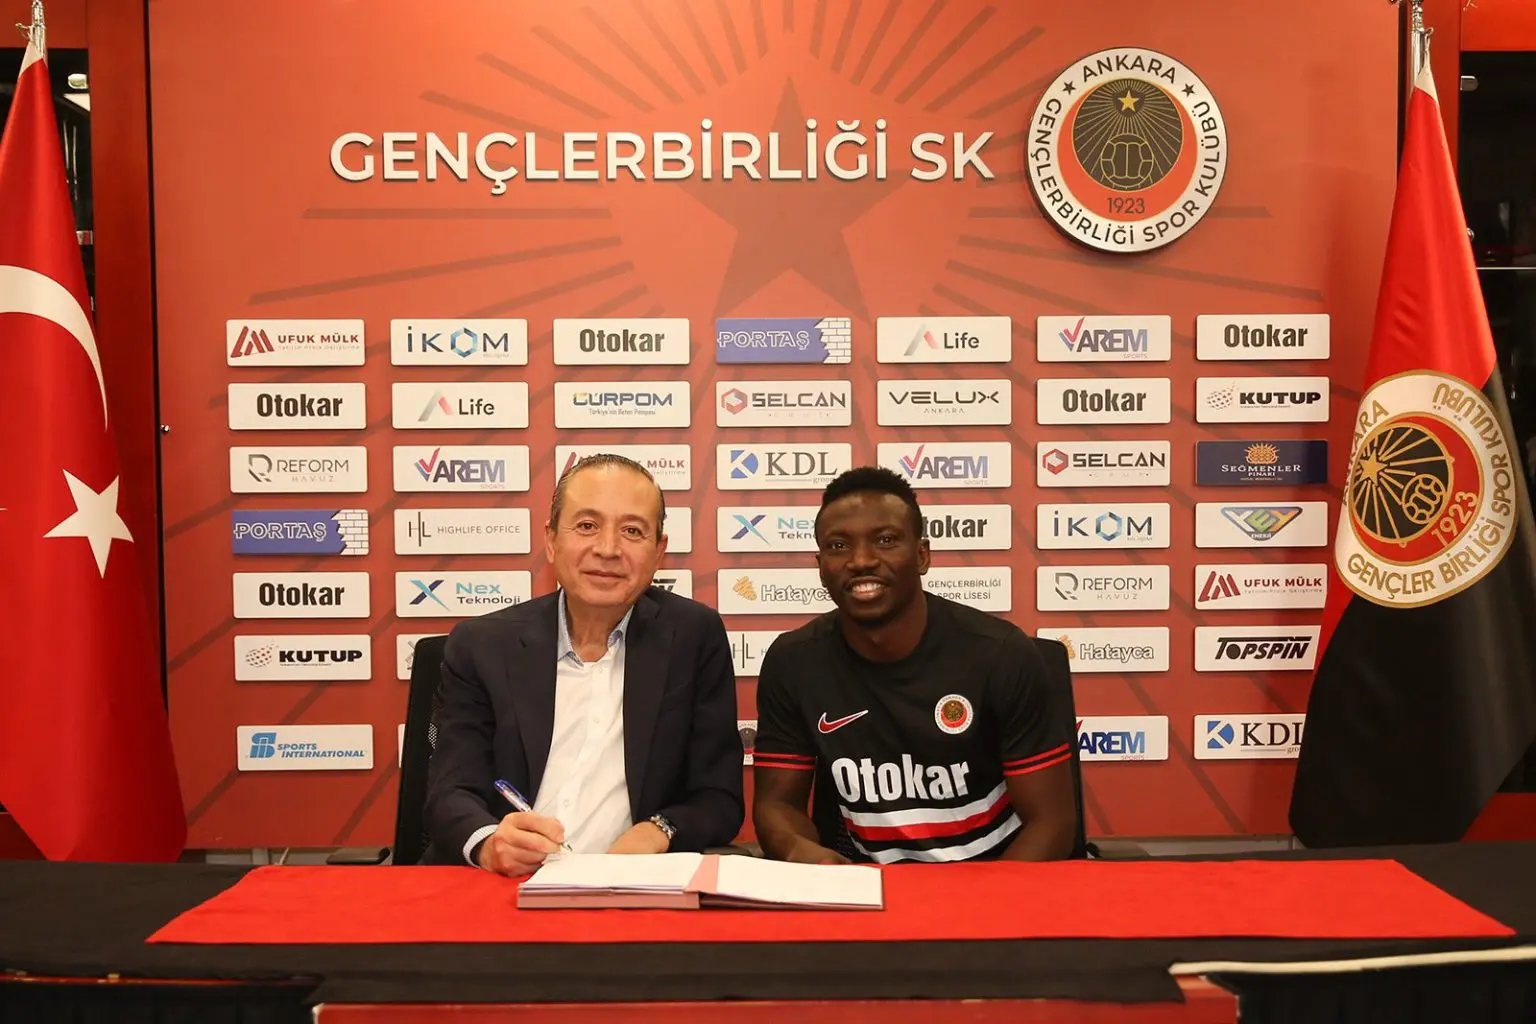 Transfer: Etebo joins Turkish club, Genclerbirligi on two-year contract